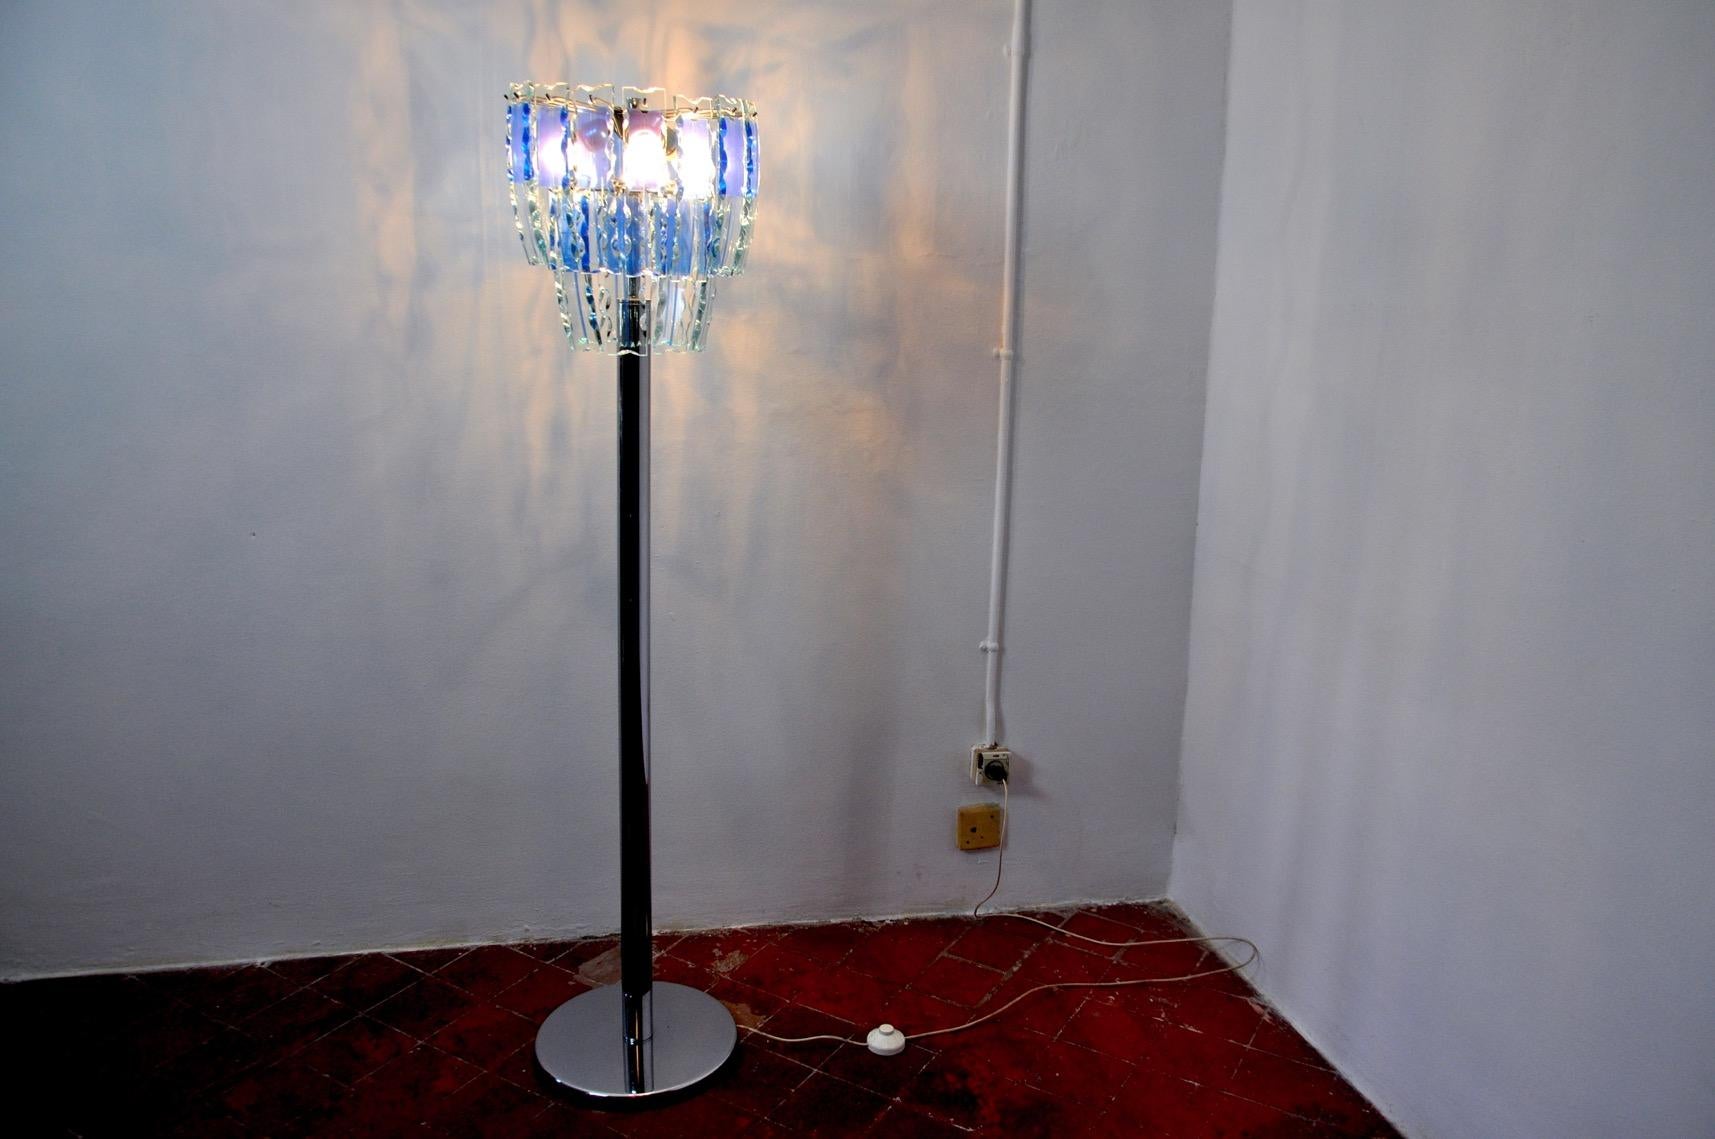 Floor lamp veca designed and produced in the 70s in Murano, Italy. Chrome structure and engraved crystals in perfect condition. Rare design object that will illuminate your interior wonderfully. Electricity checked, marks of time relating to the age